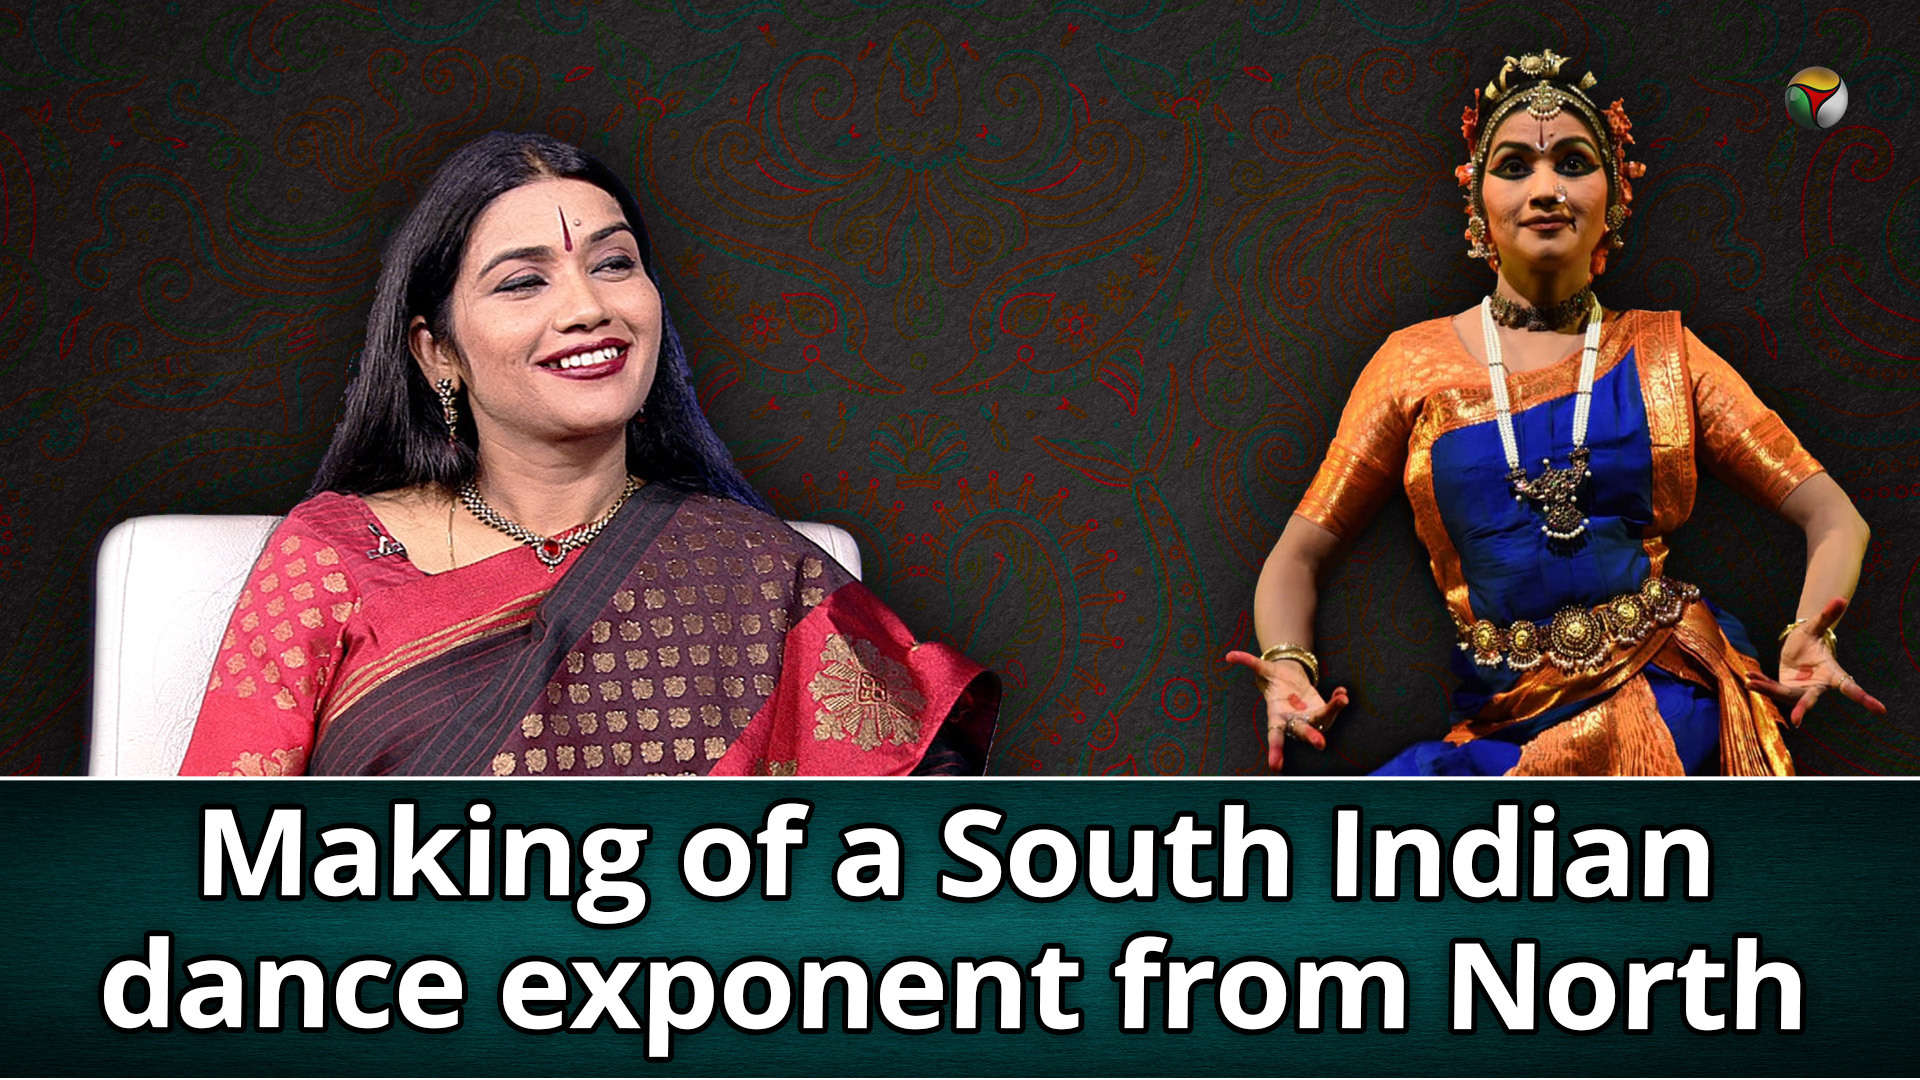 Watch: Making of a South Indian dance exponent from the North